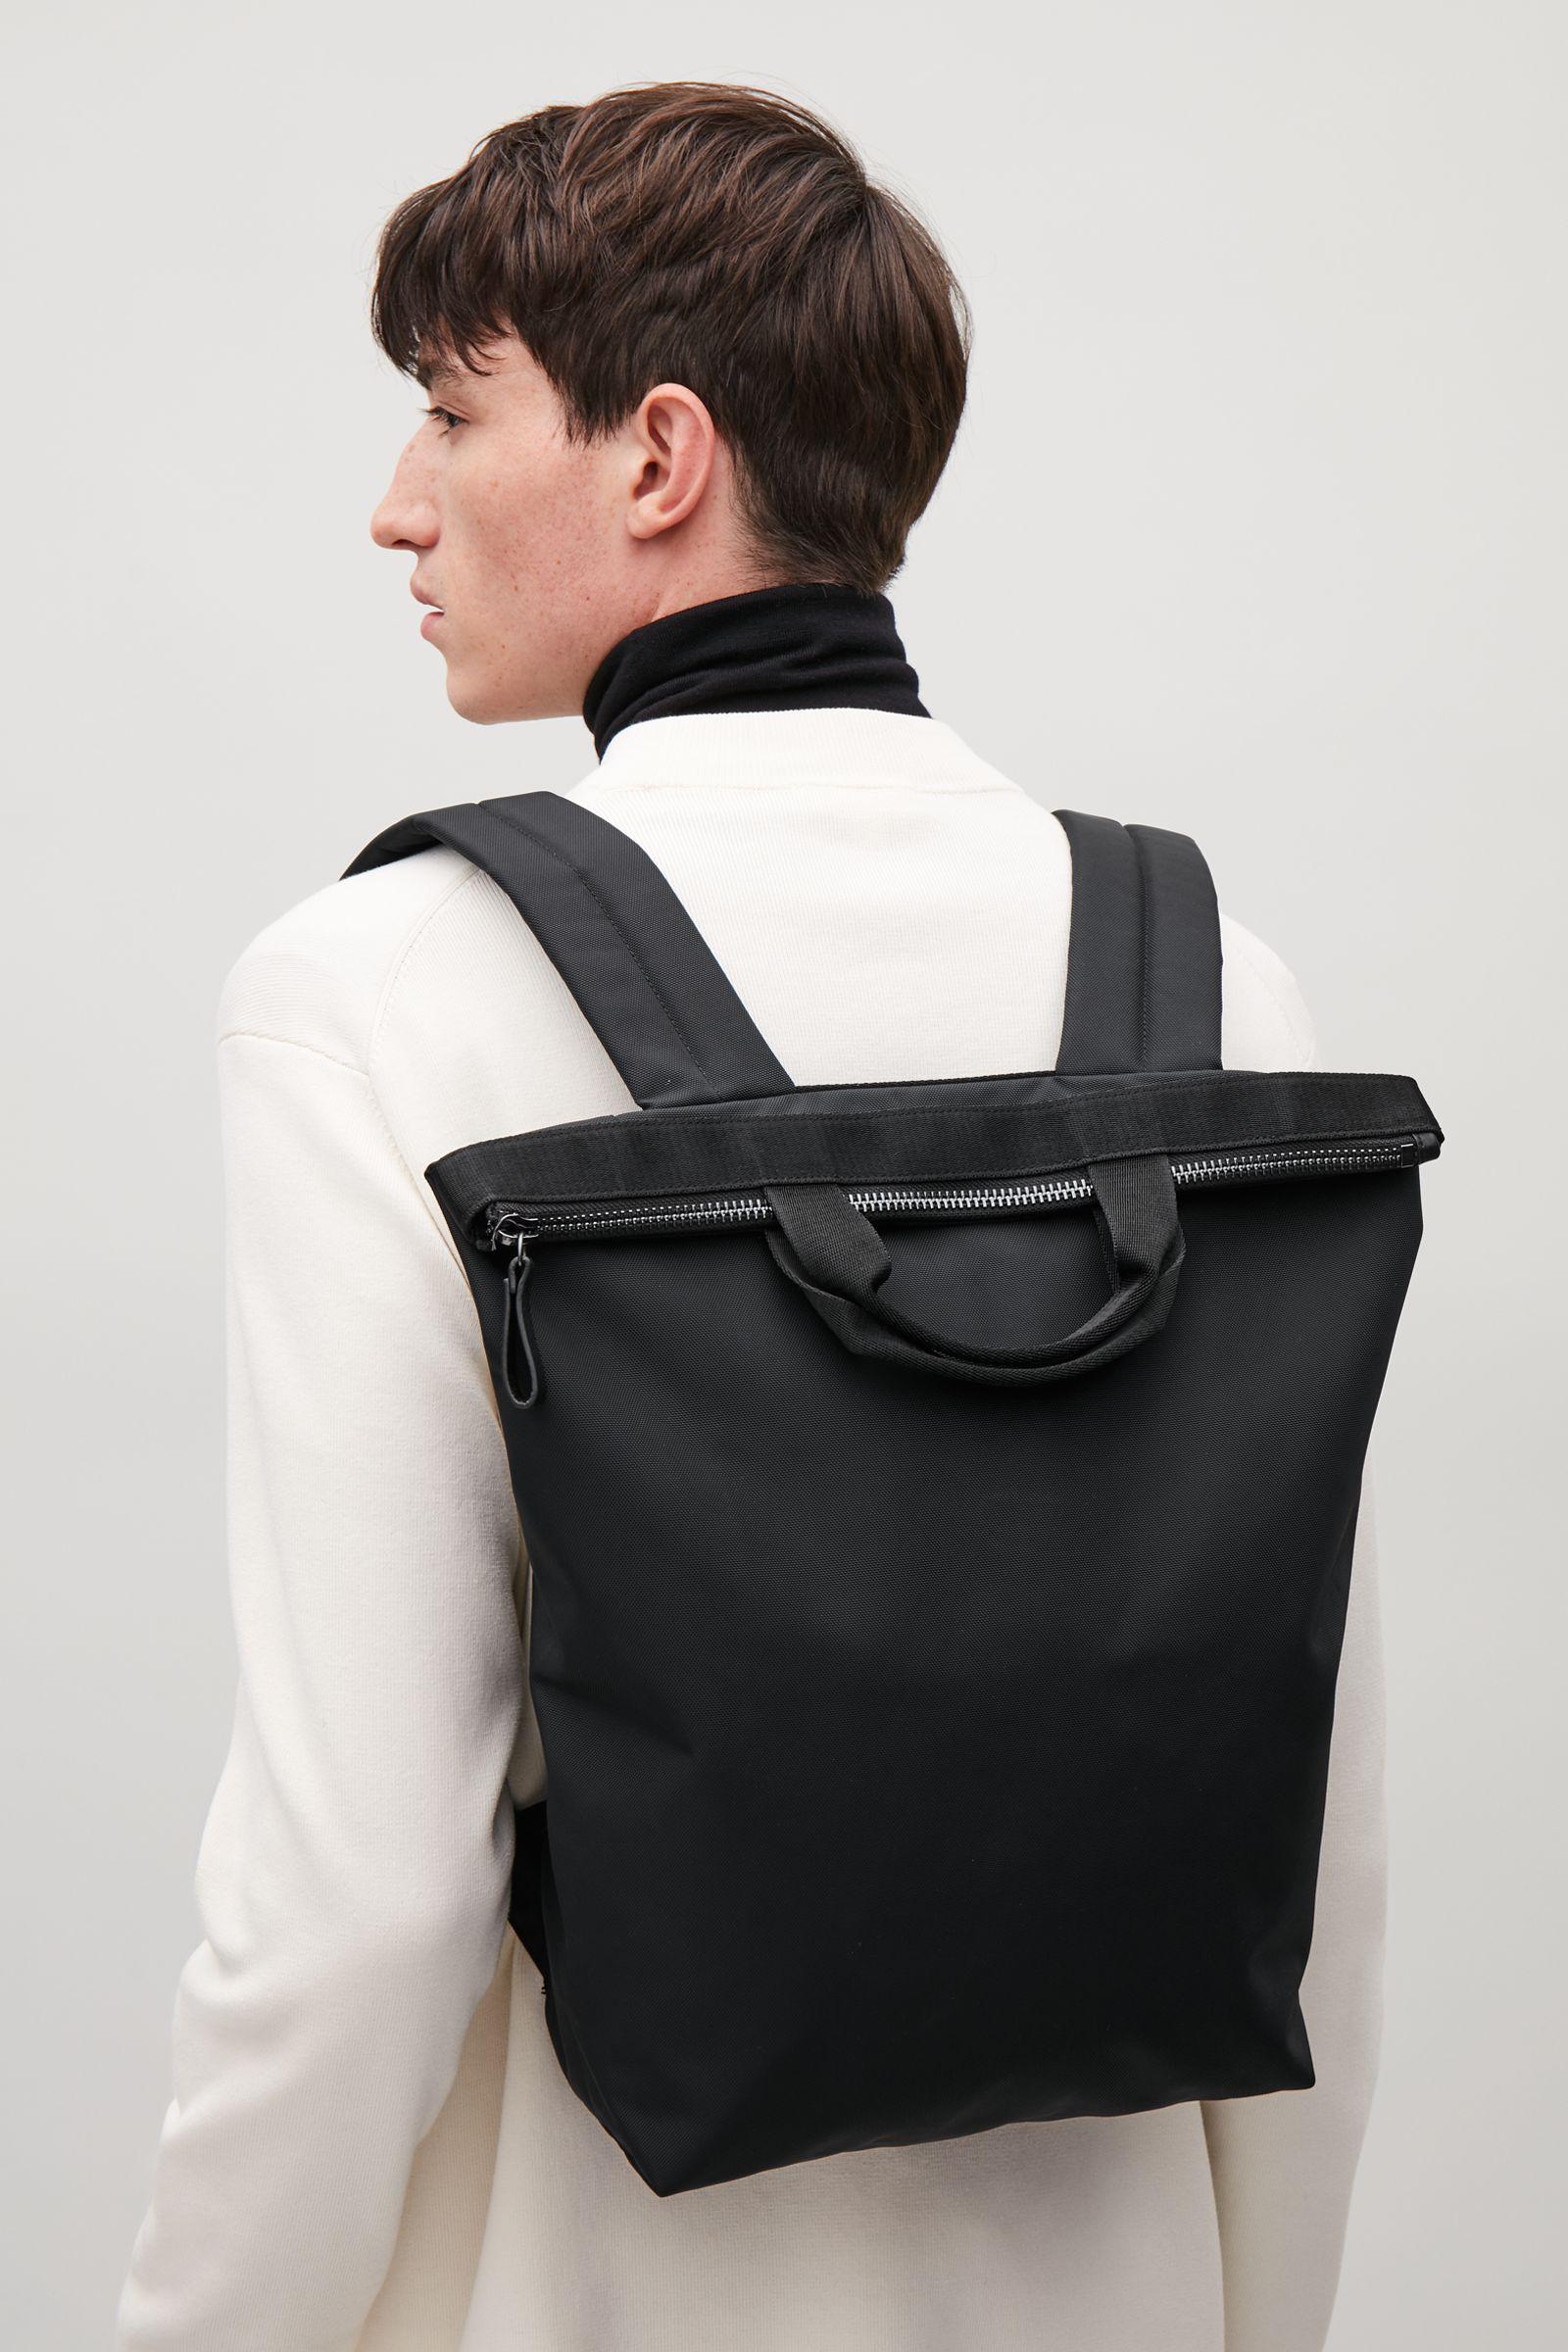 COS Leather Tote Backpack in Dark Navy (Blue) for Men - Lyst